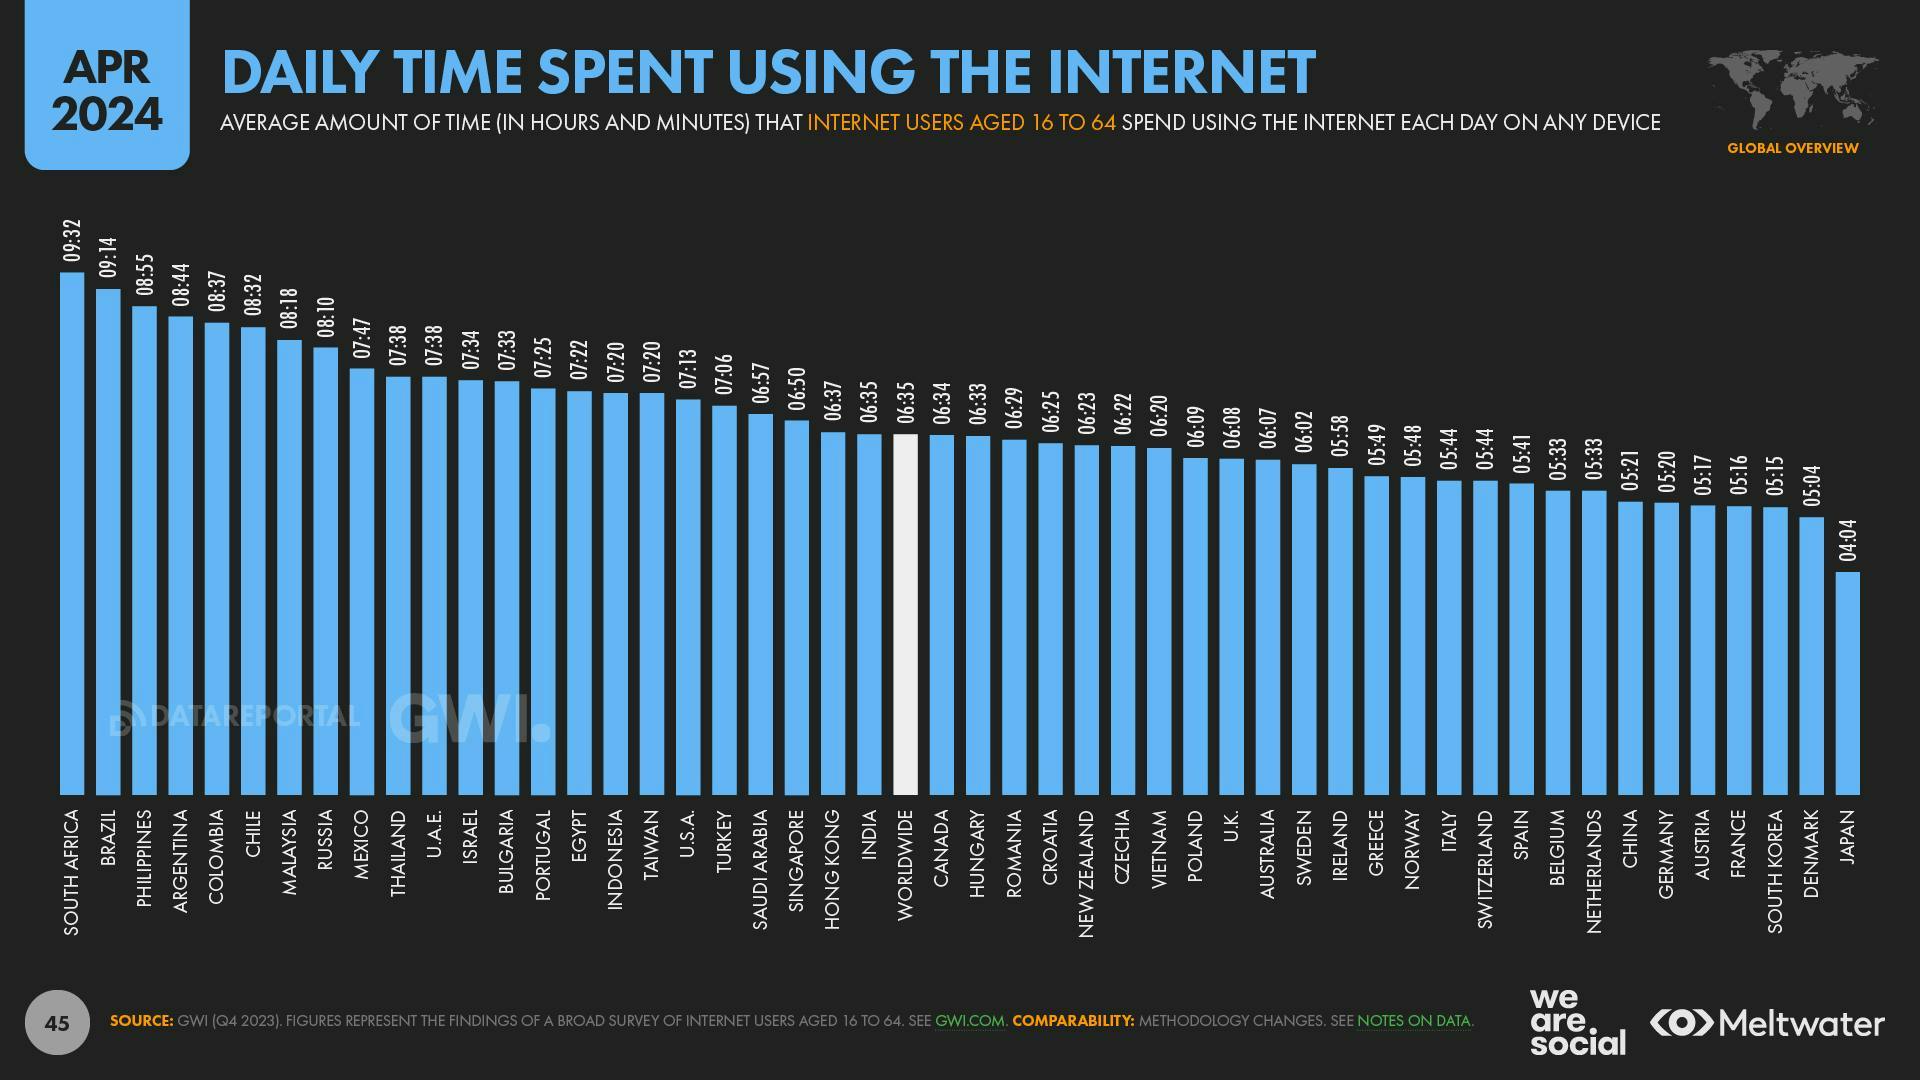 Daily time spent using the internet